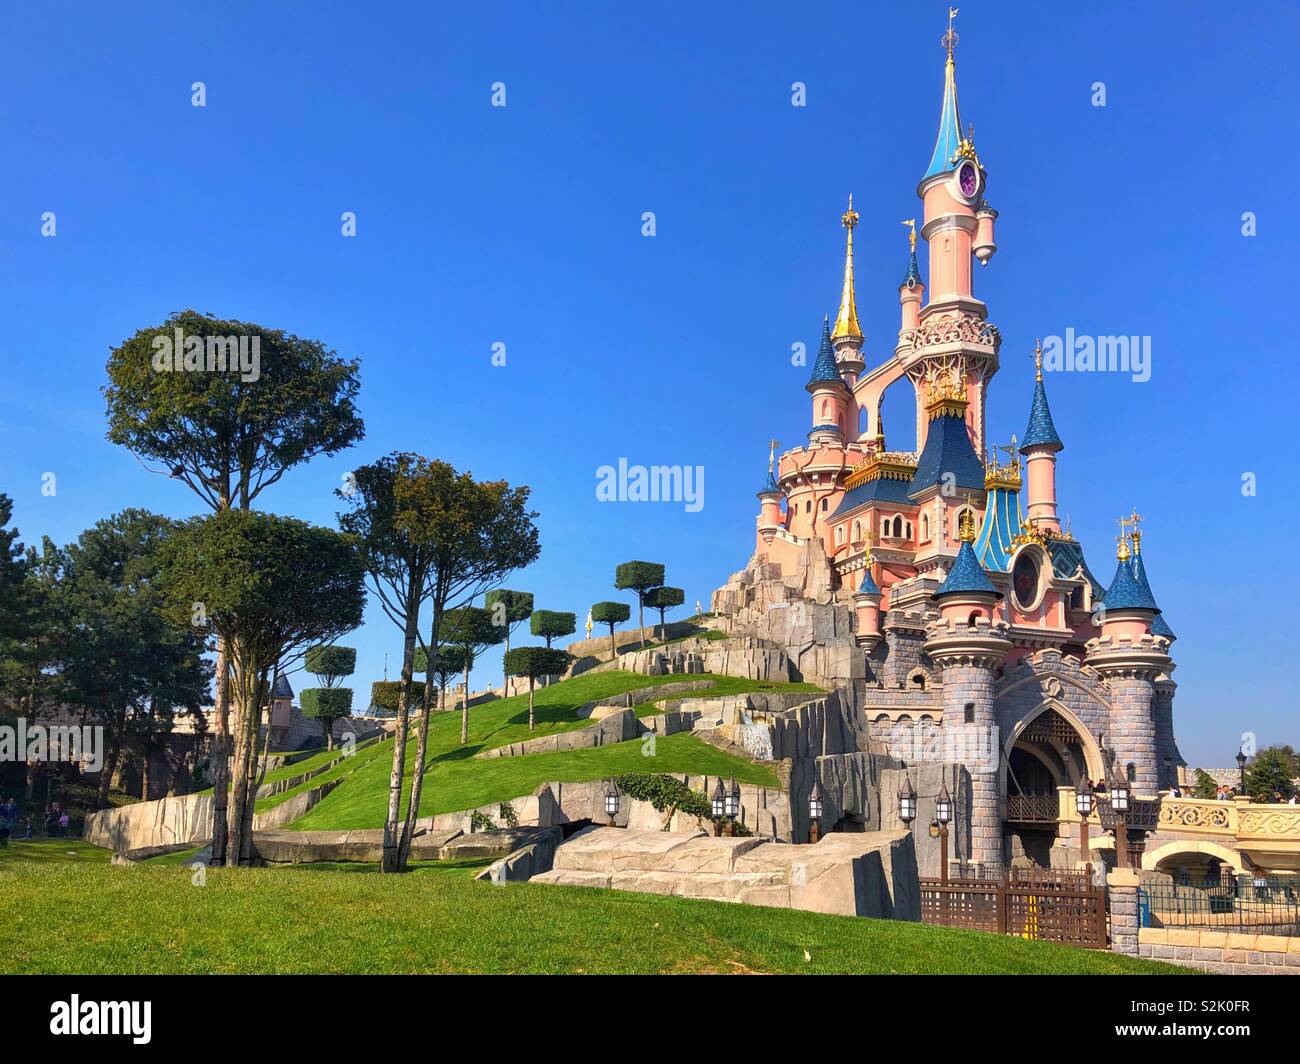 Disneyland Paris High Resolution Stock Photography And Images Alamy